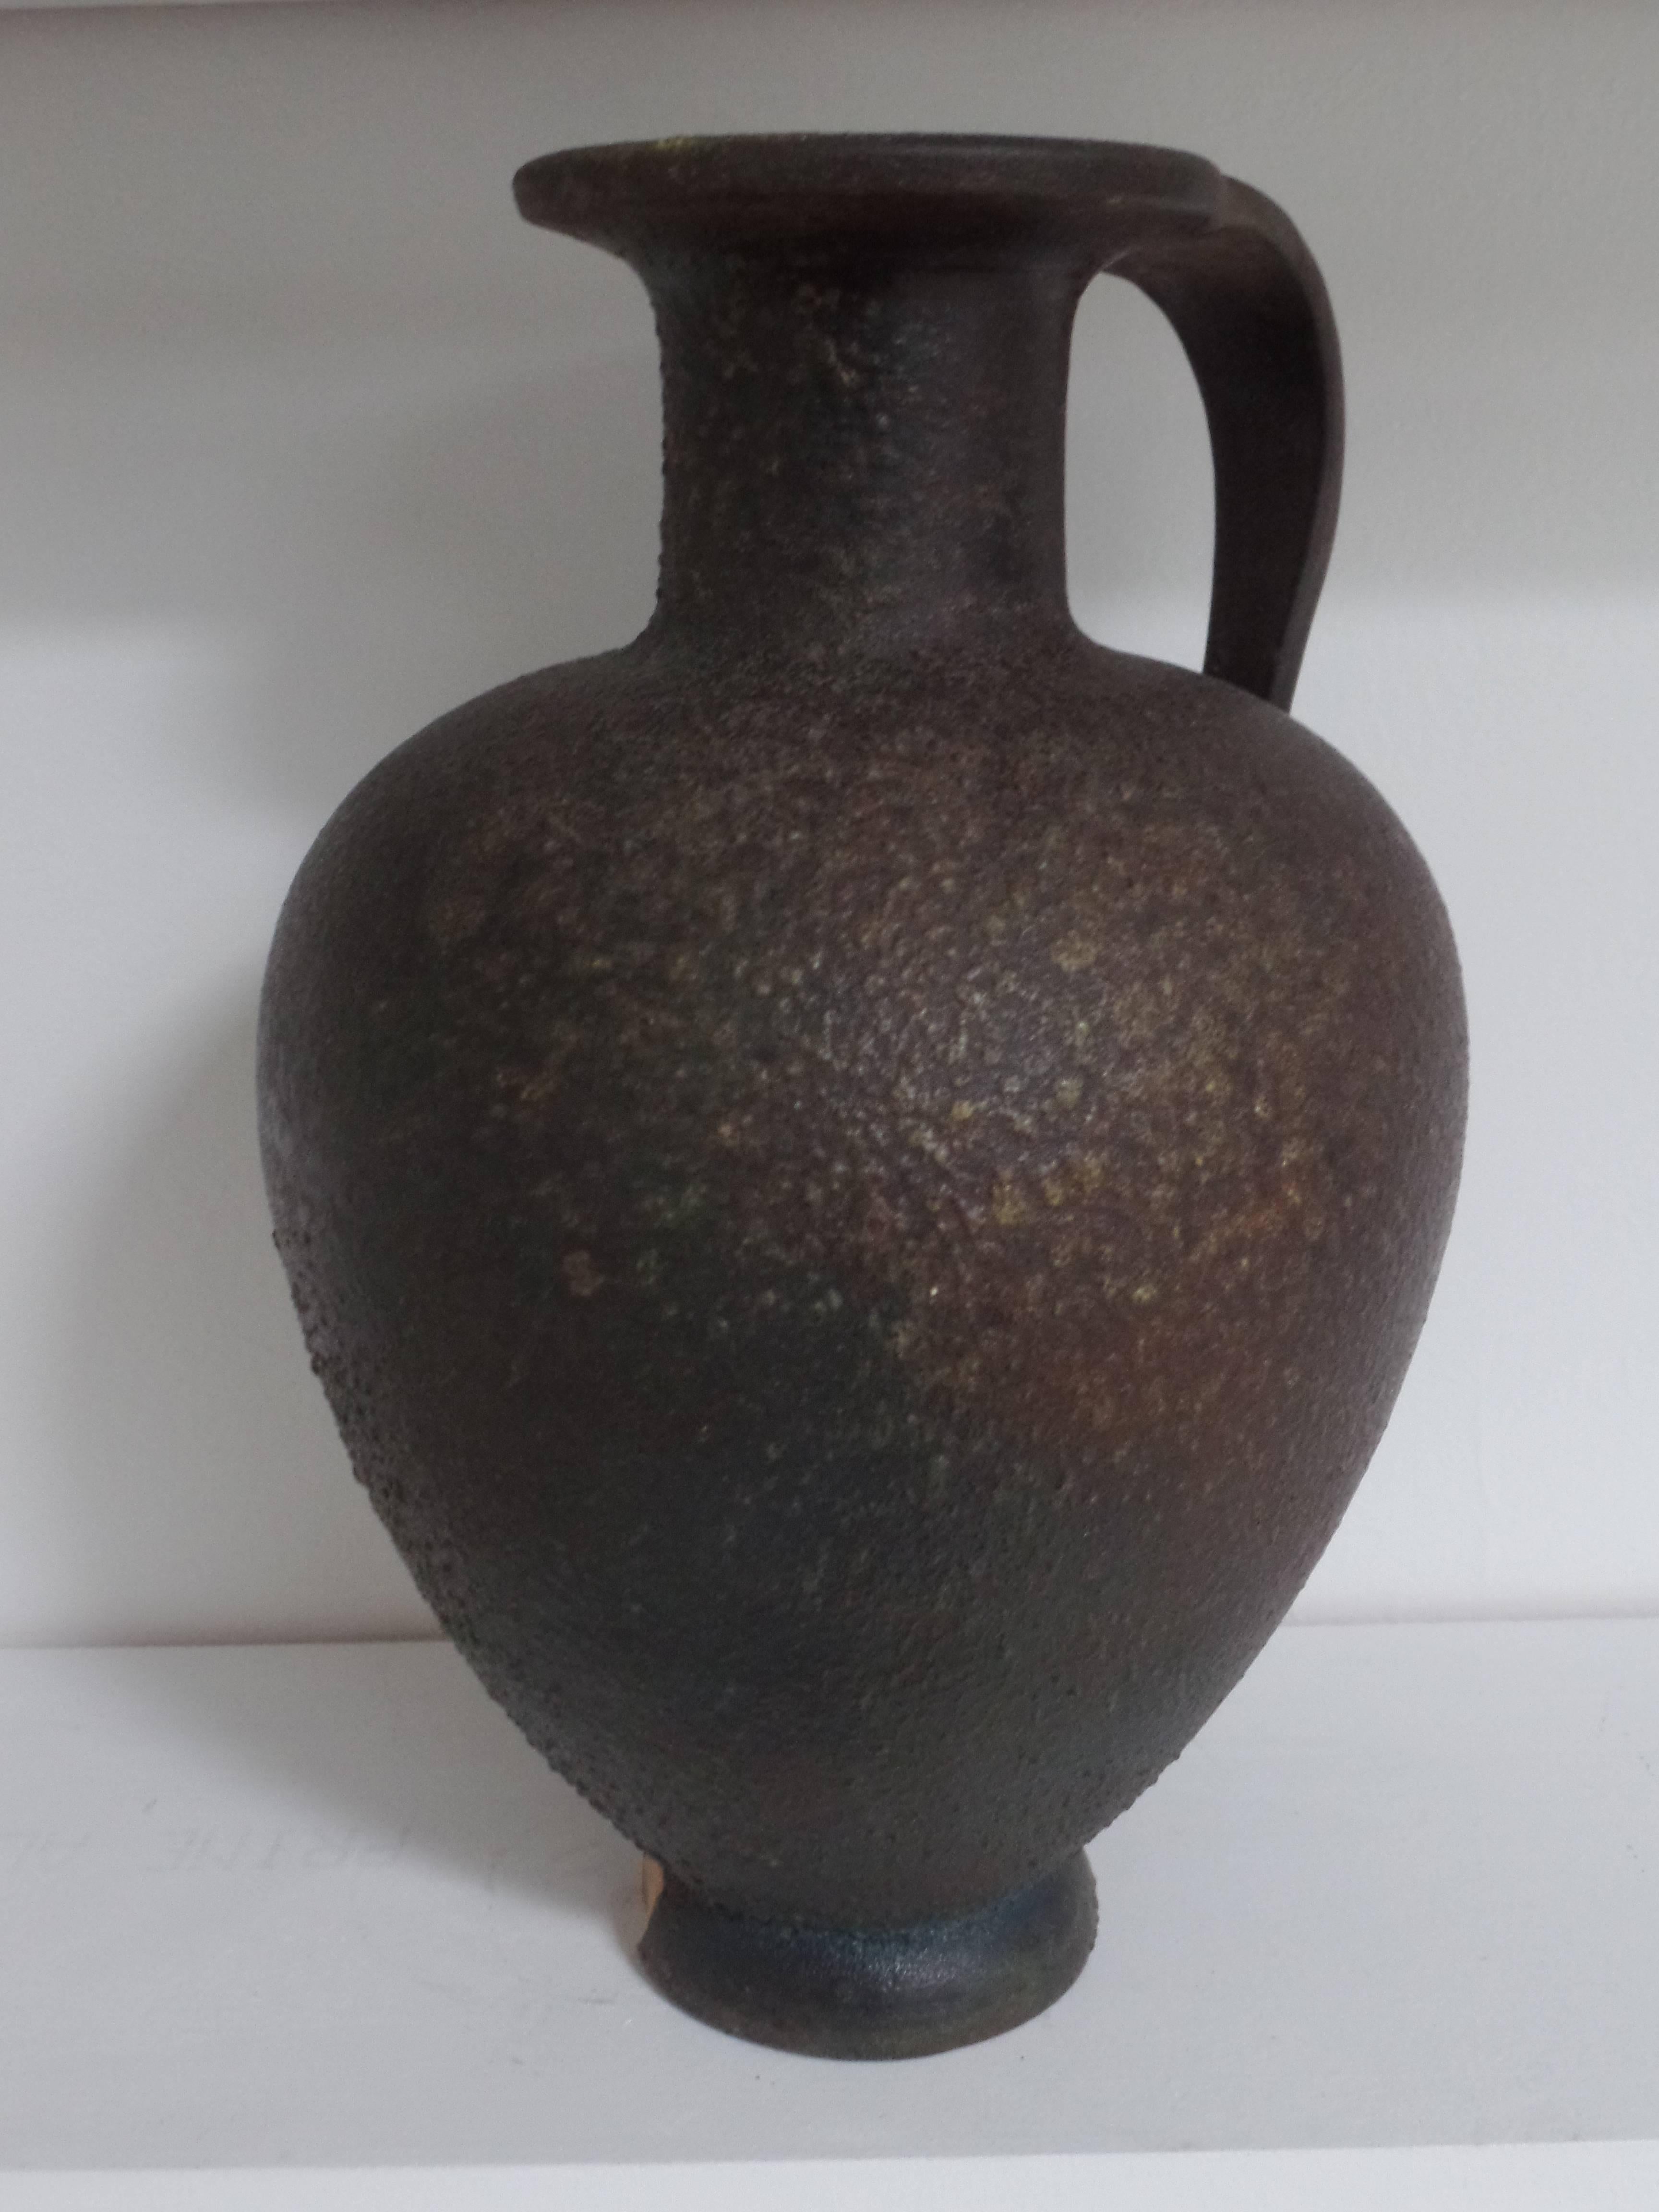 An elegant pair of handmade French Mid-Century stoneware vases/urns/pitchers/objet d' Art in a sober, pure form and with a deep bronze patina. Wonderful masterpieces of form, elegance and simplicity.

(Ceramics, Pottery).